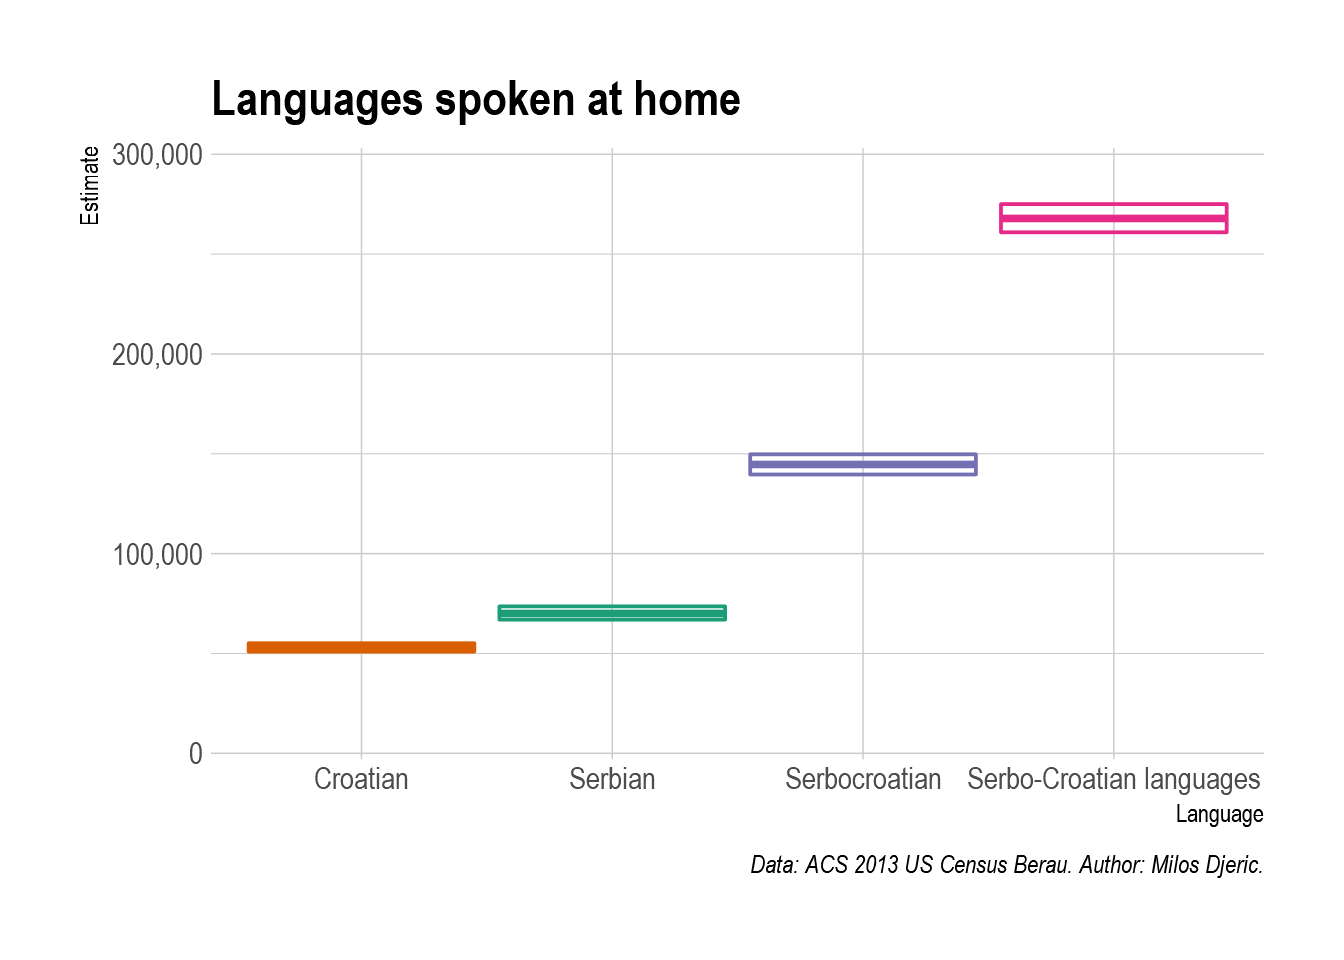 Chart on languages spoken at home, Croatian about 50,000, Serbian around 75,000, Serbocroatian around 150,000, in total about 275,000. Data ACS 2013 US Census Bureau.